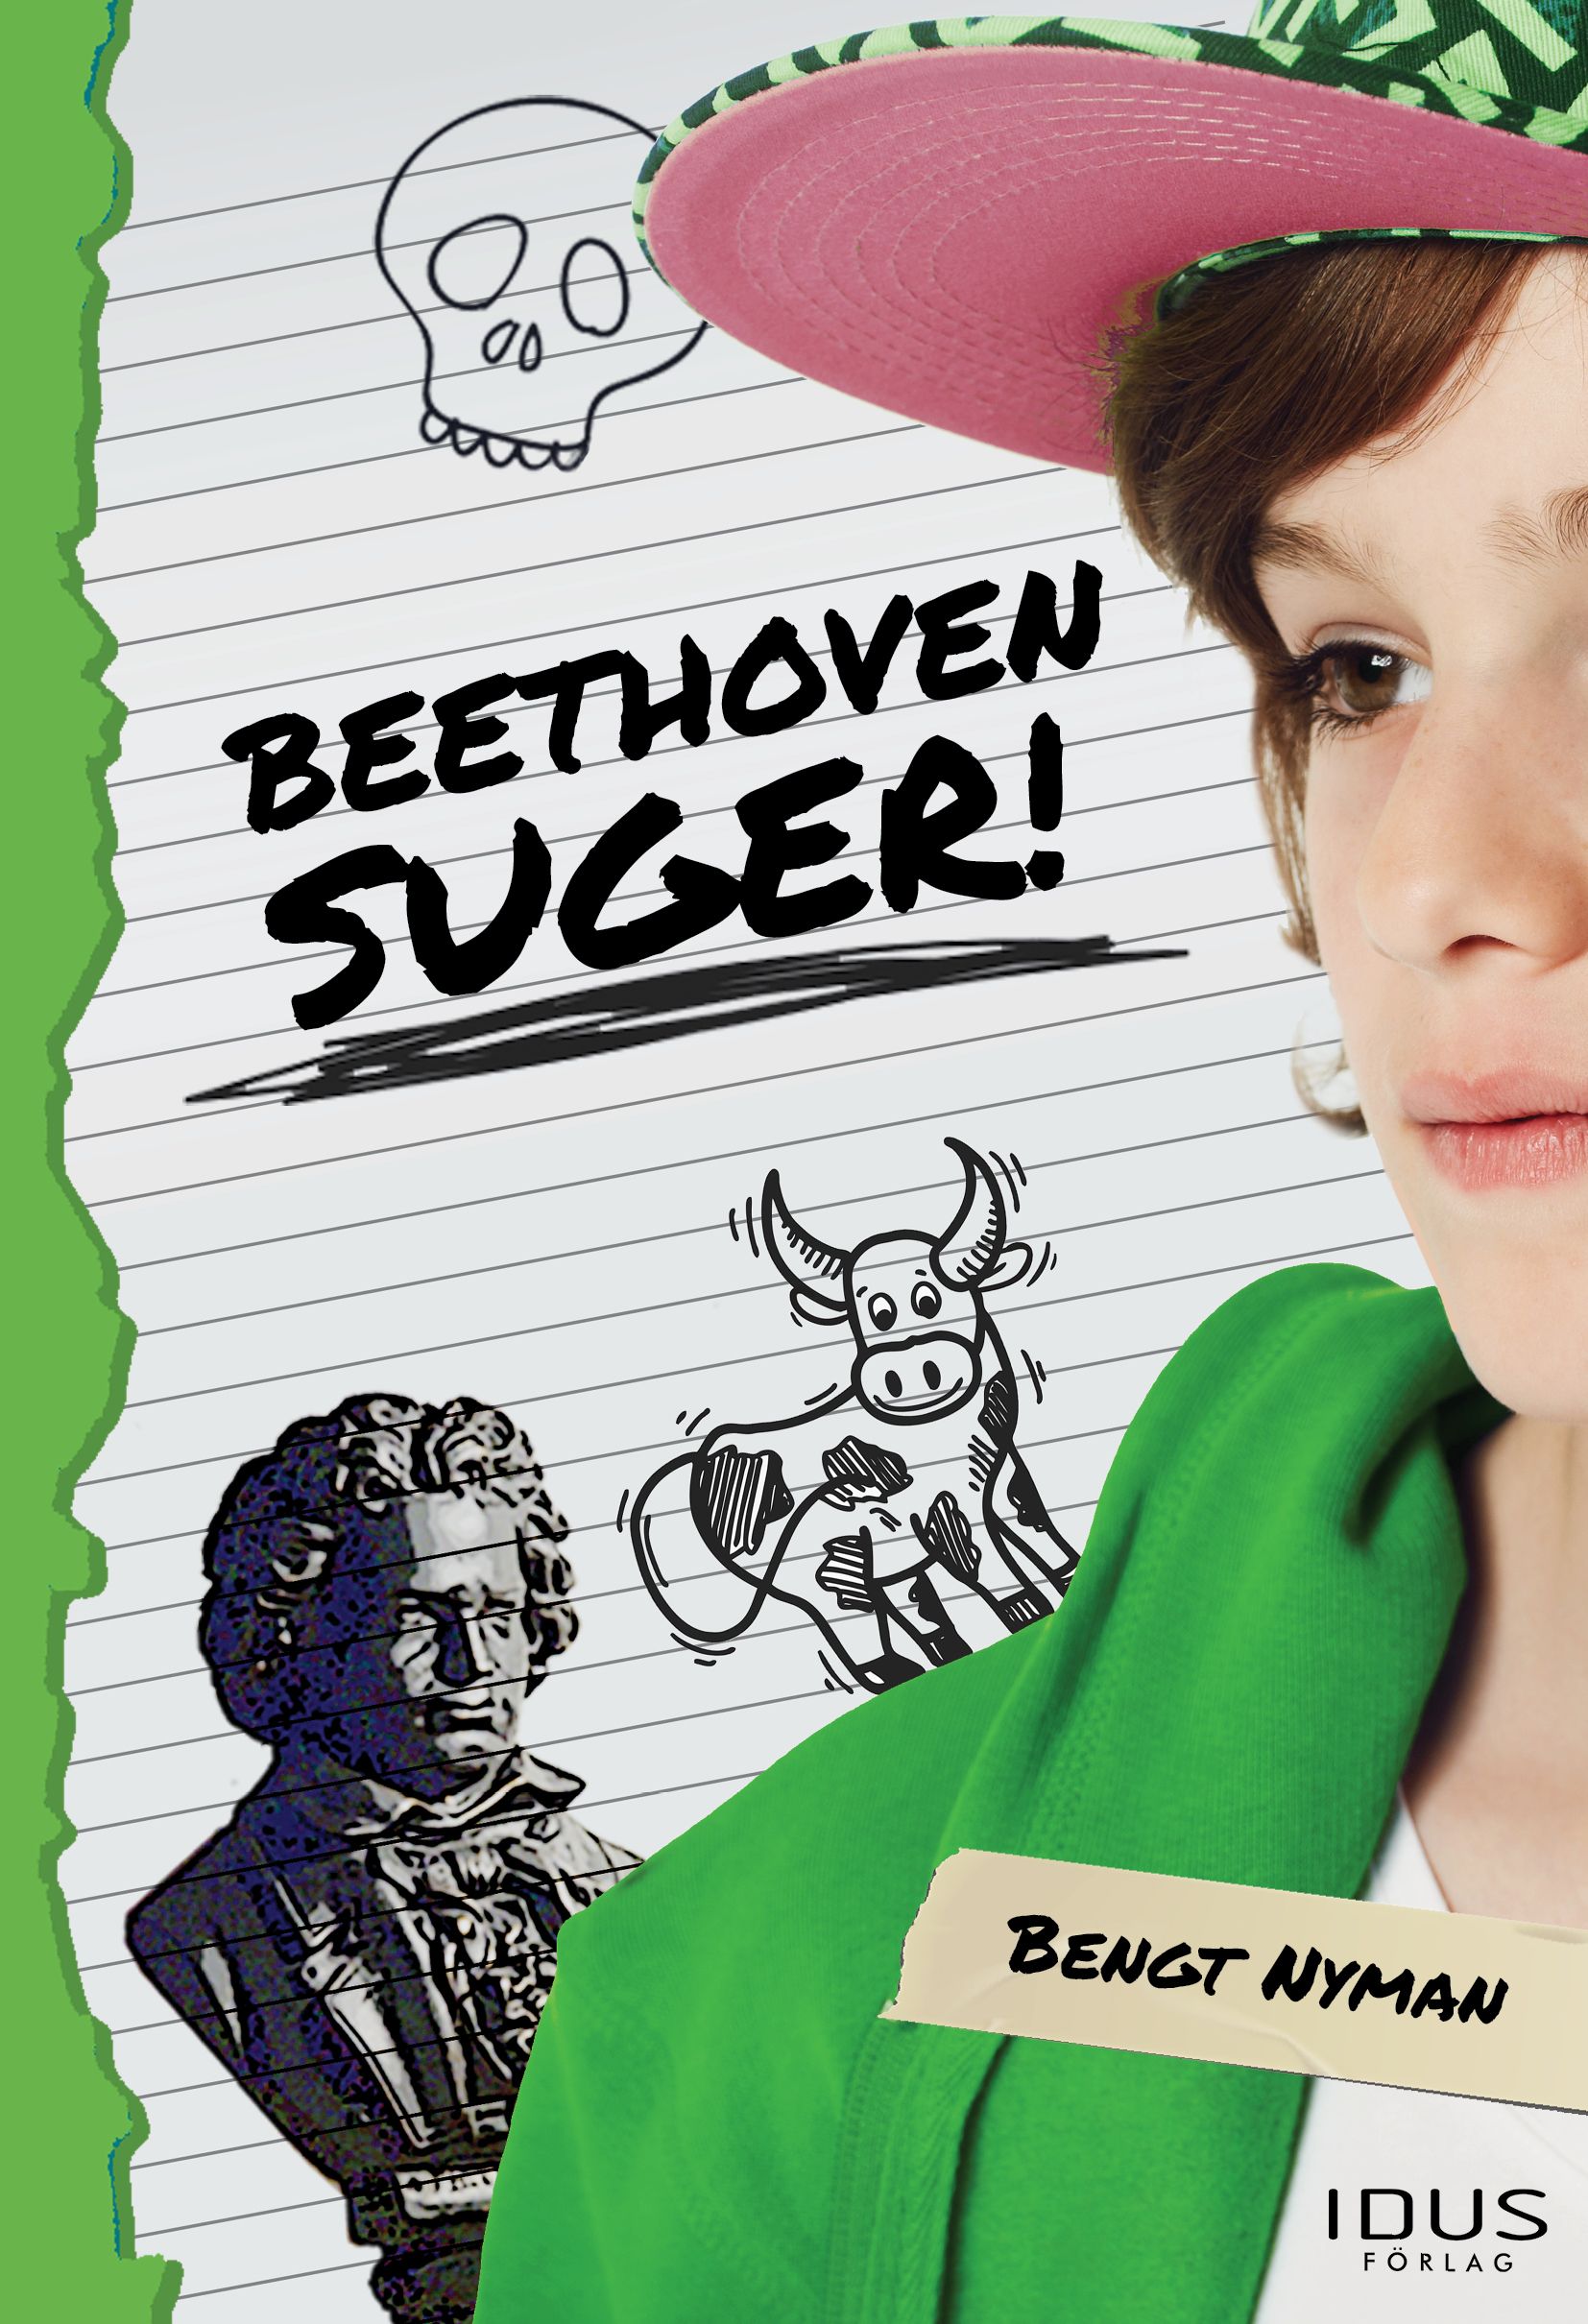 Beethoven suger!, eBook by Bengt Nyman